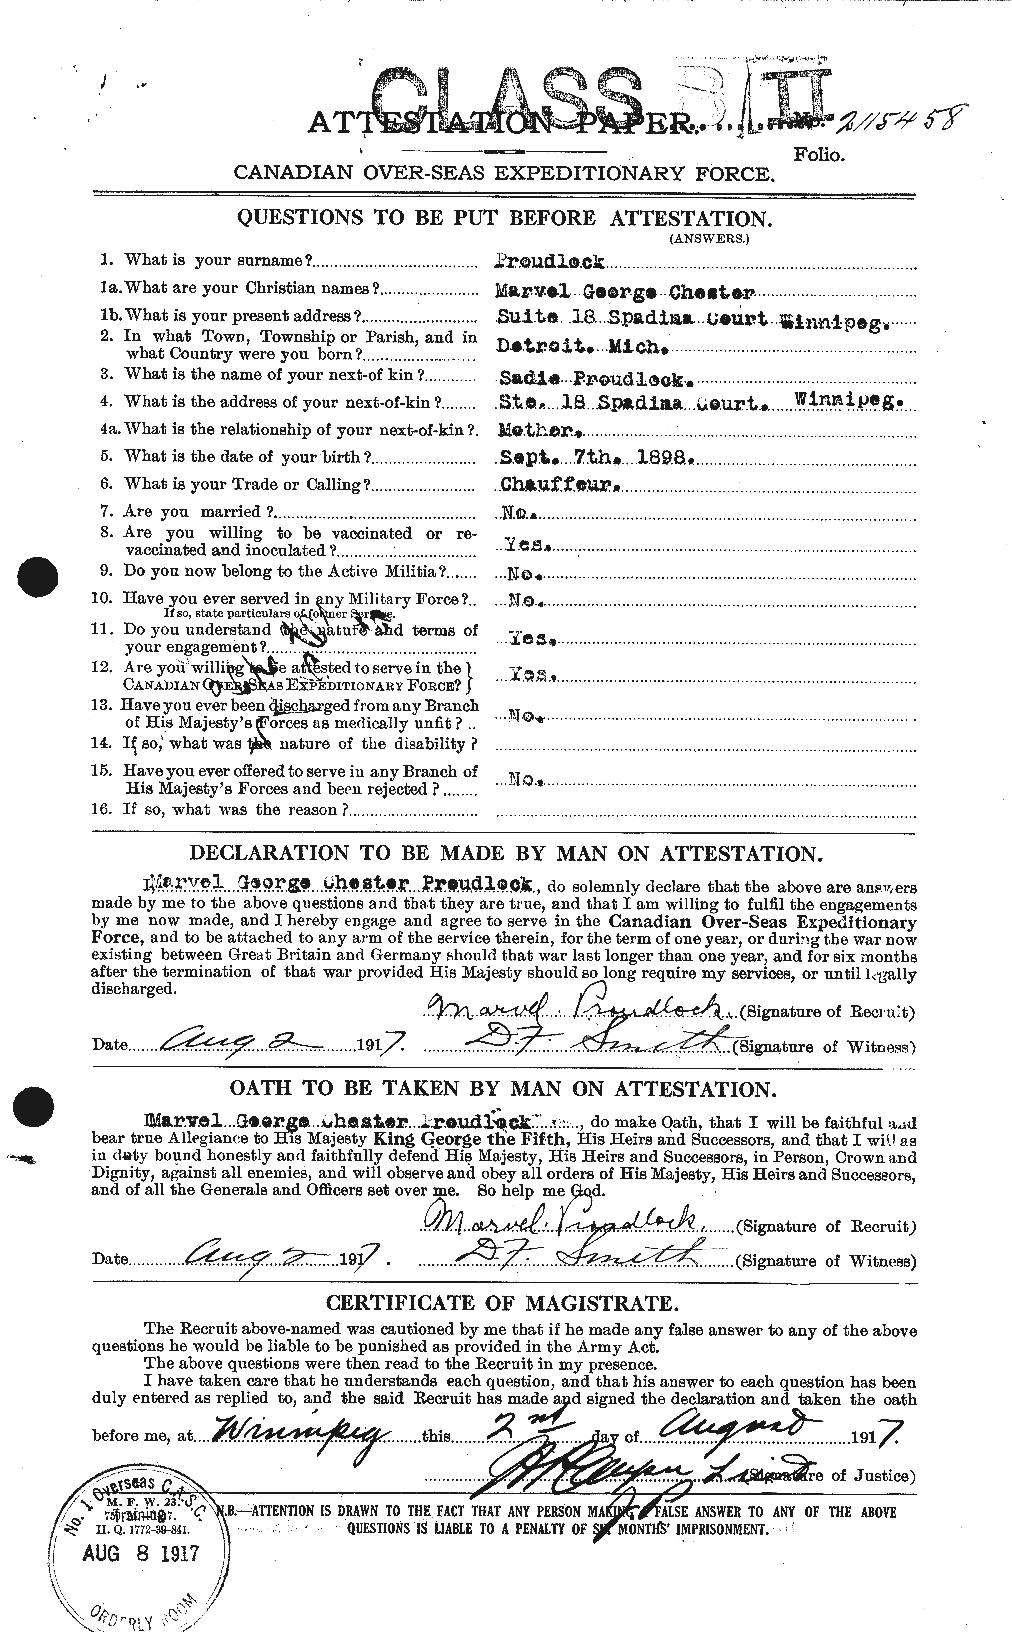 Personnel Records of the First World War - CEF 591484a